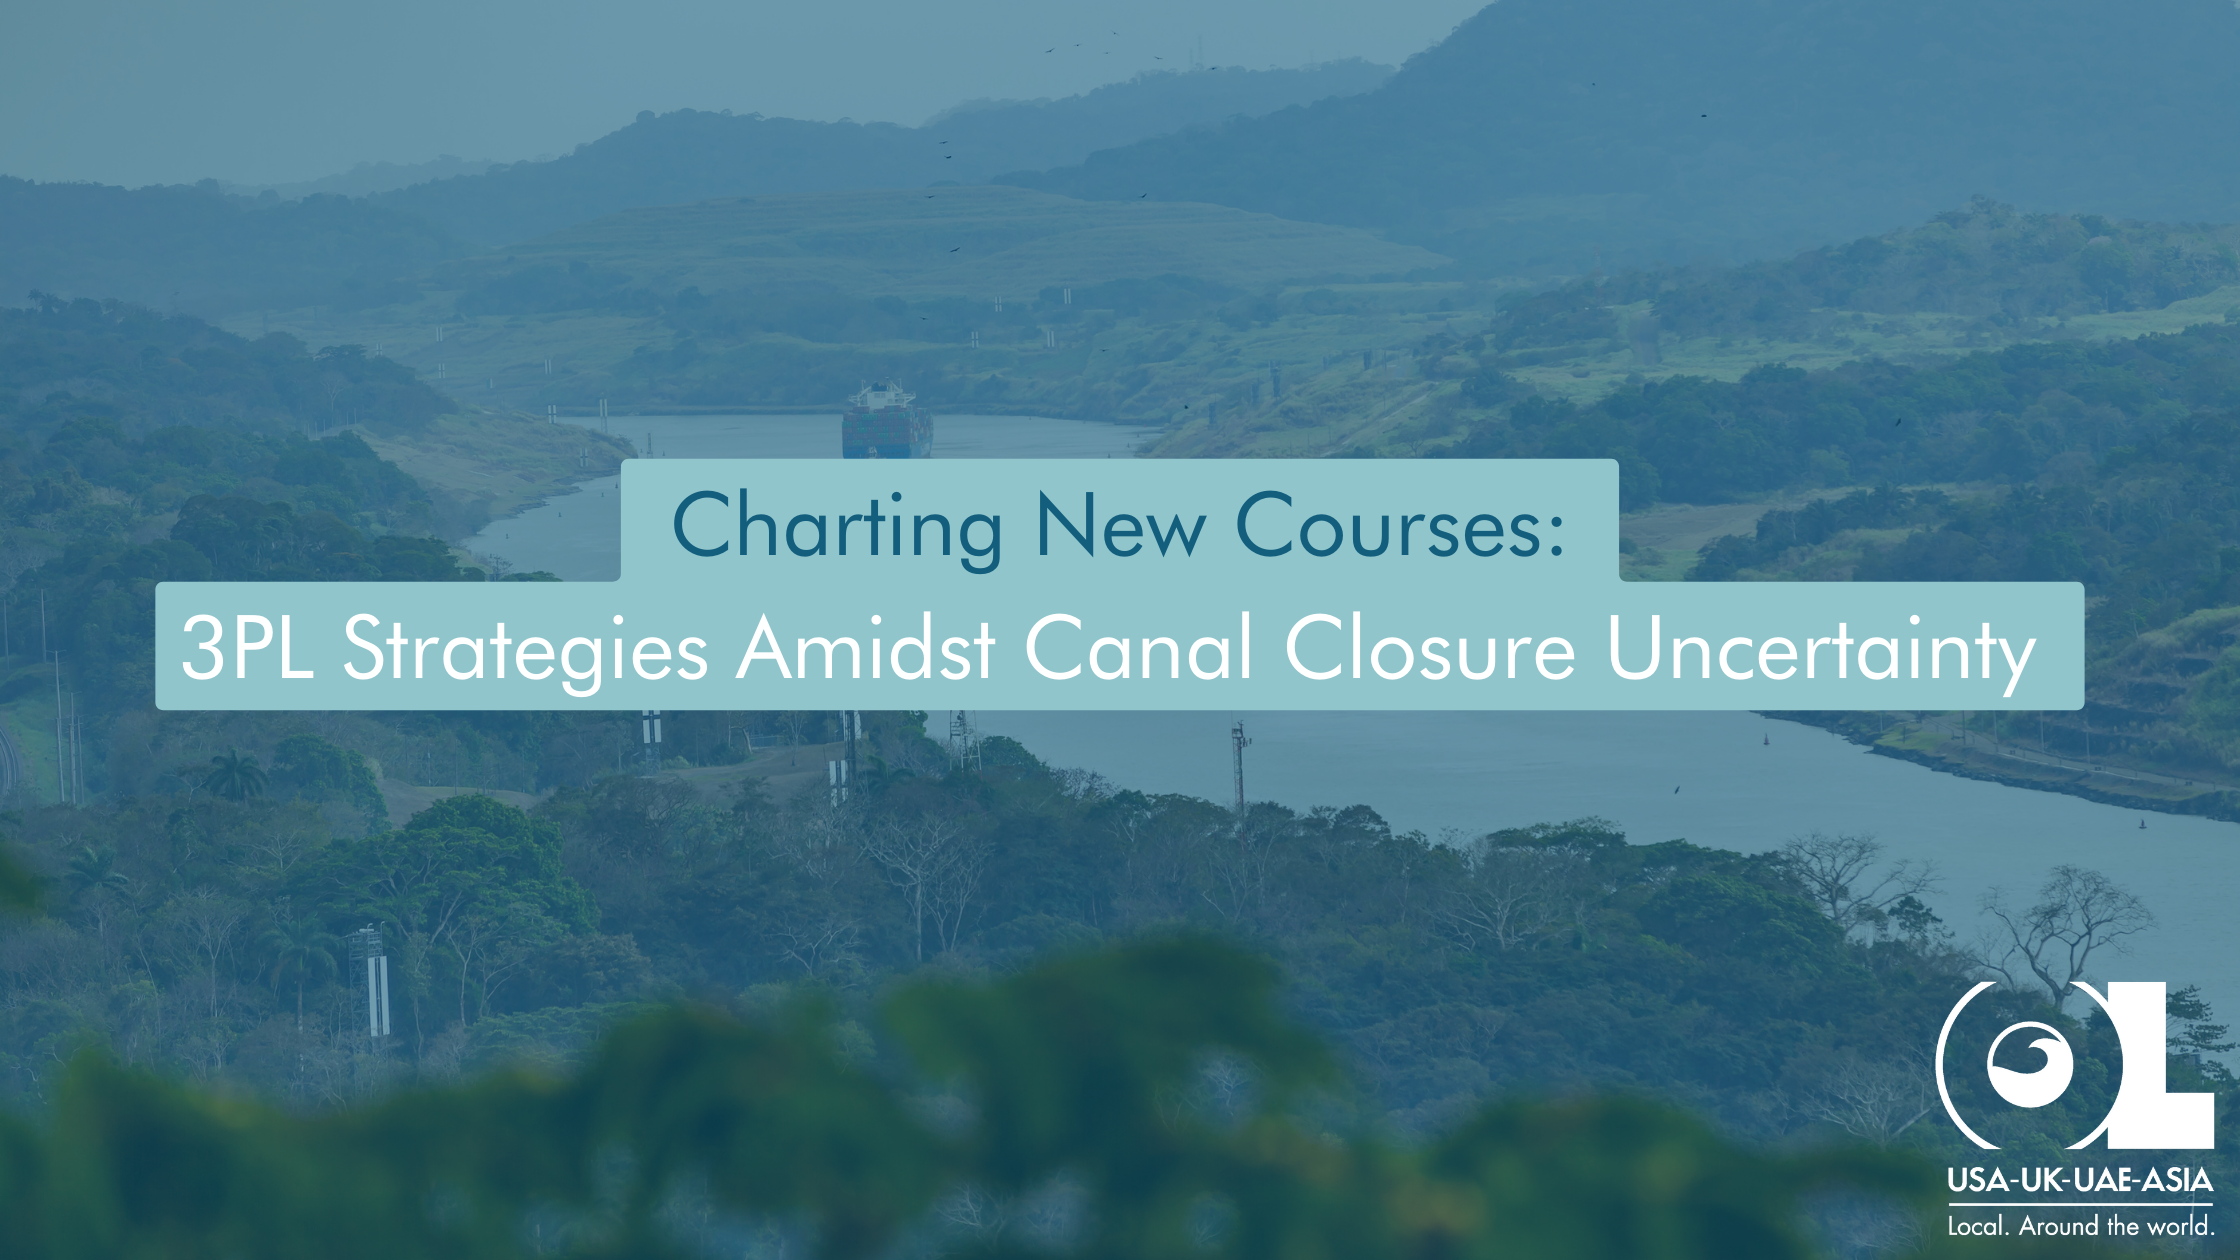 Charting-New-Courses-3PL-Strategies-Amidst-Canal-Closure-Uncertainty-OL-USA